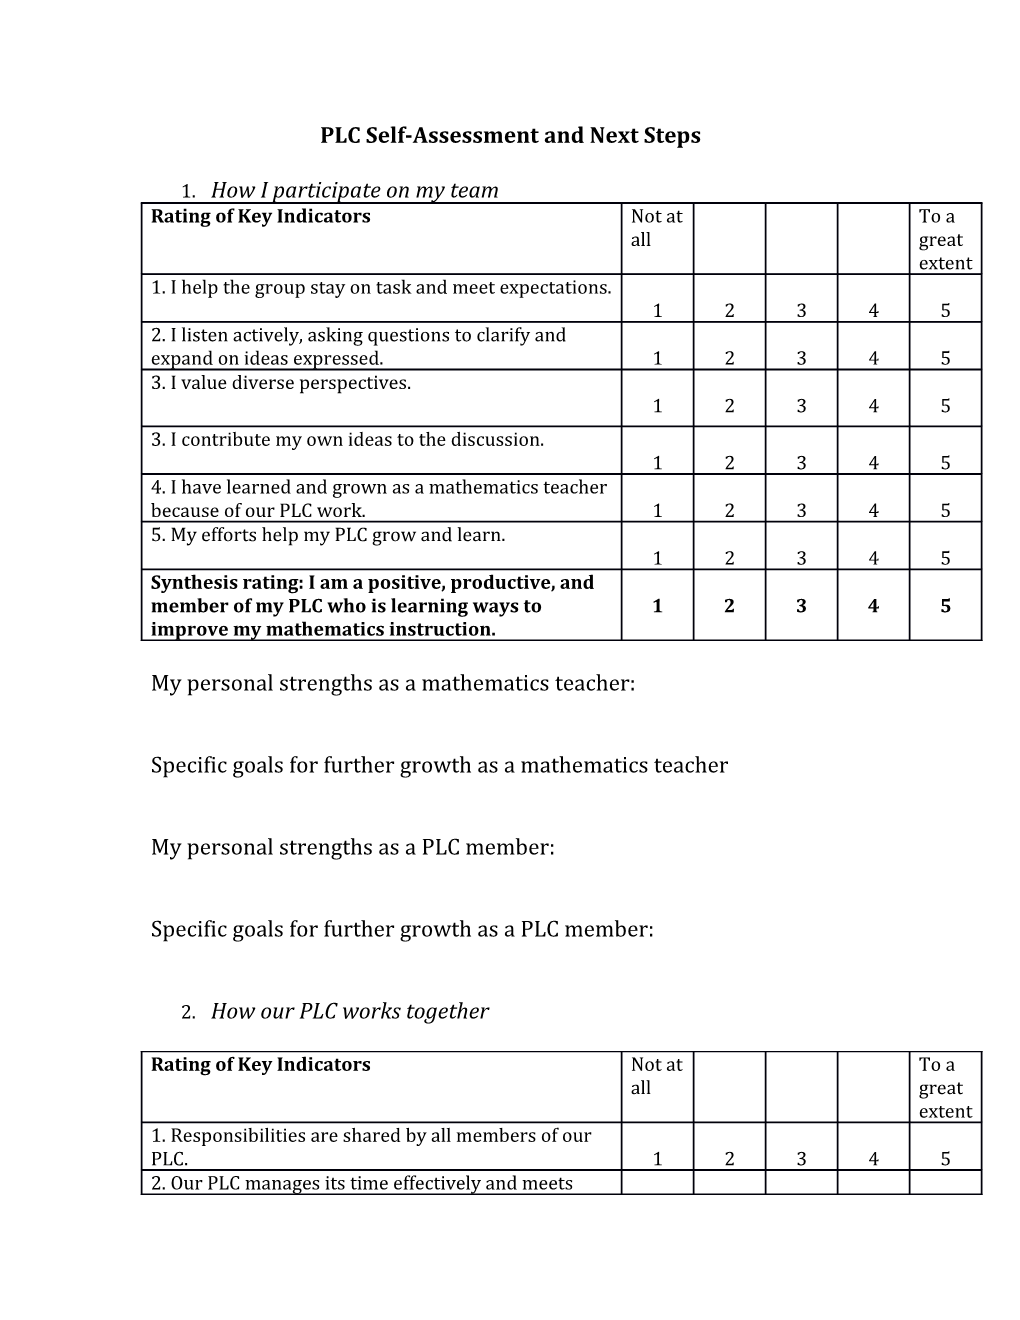 PLC Self-Assessment and Next Steps